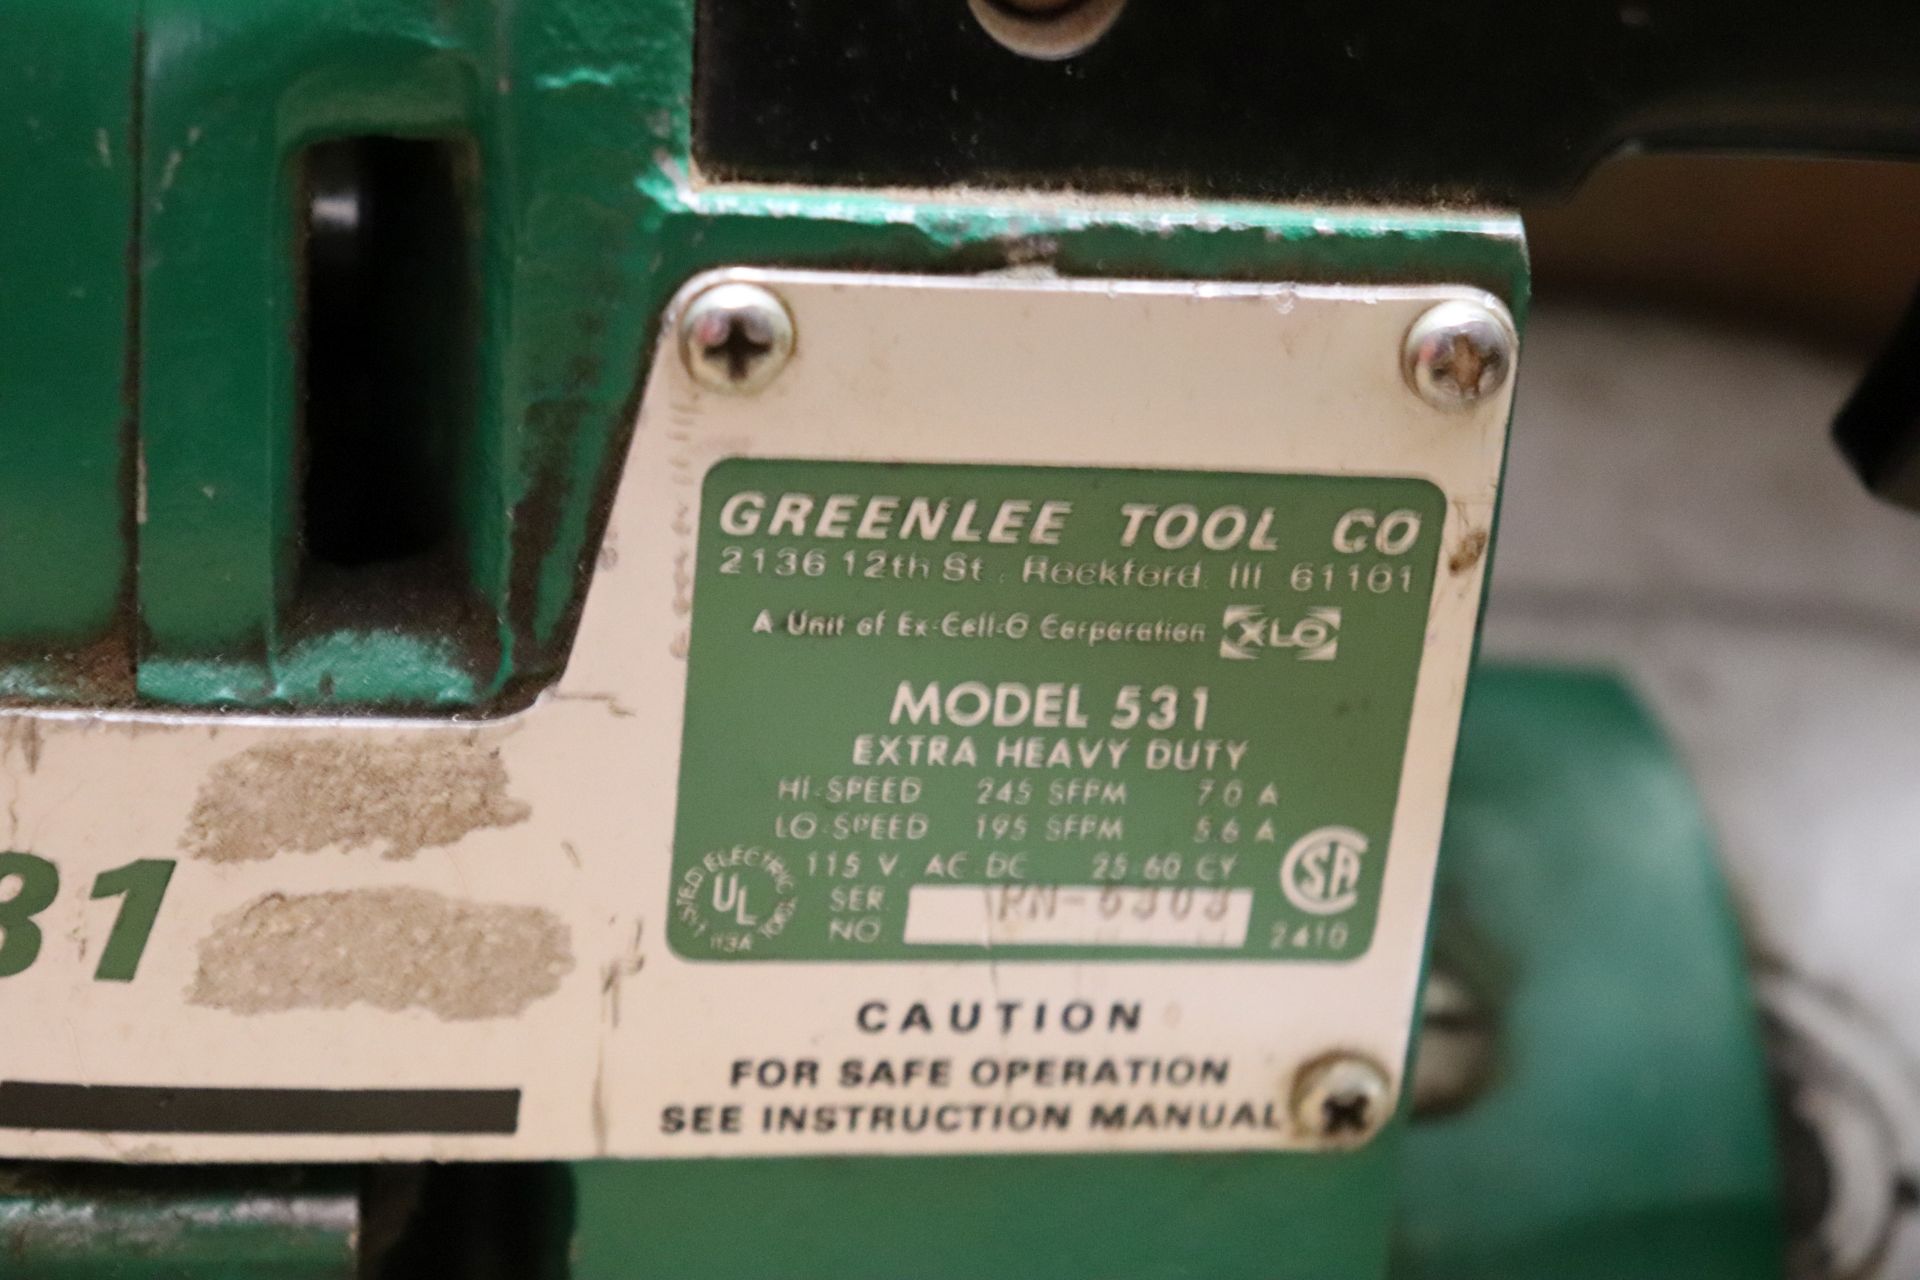 Greenlee 531 portable bandsaw in case - Image 3 of 3